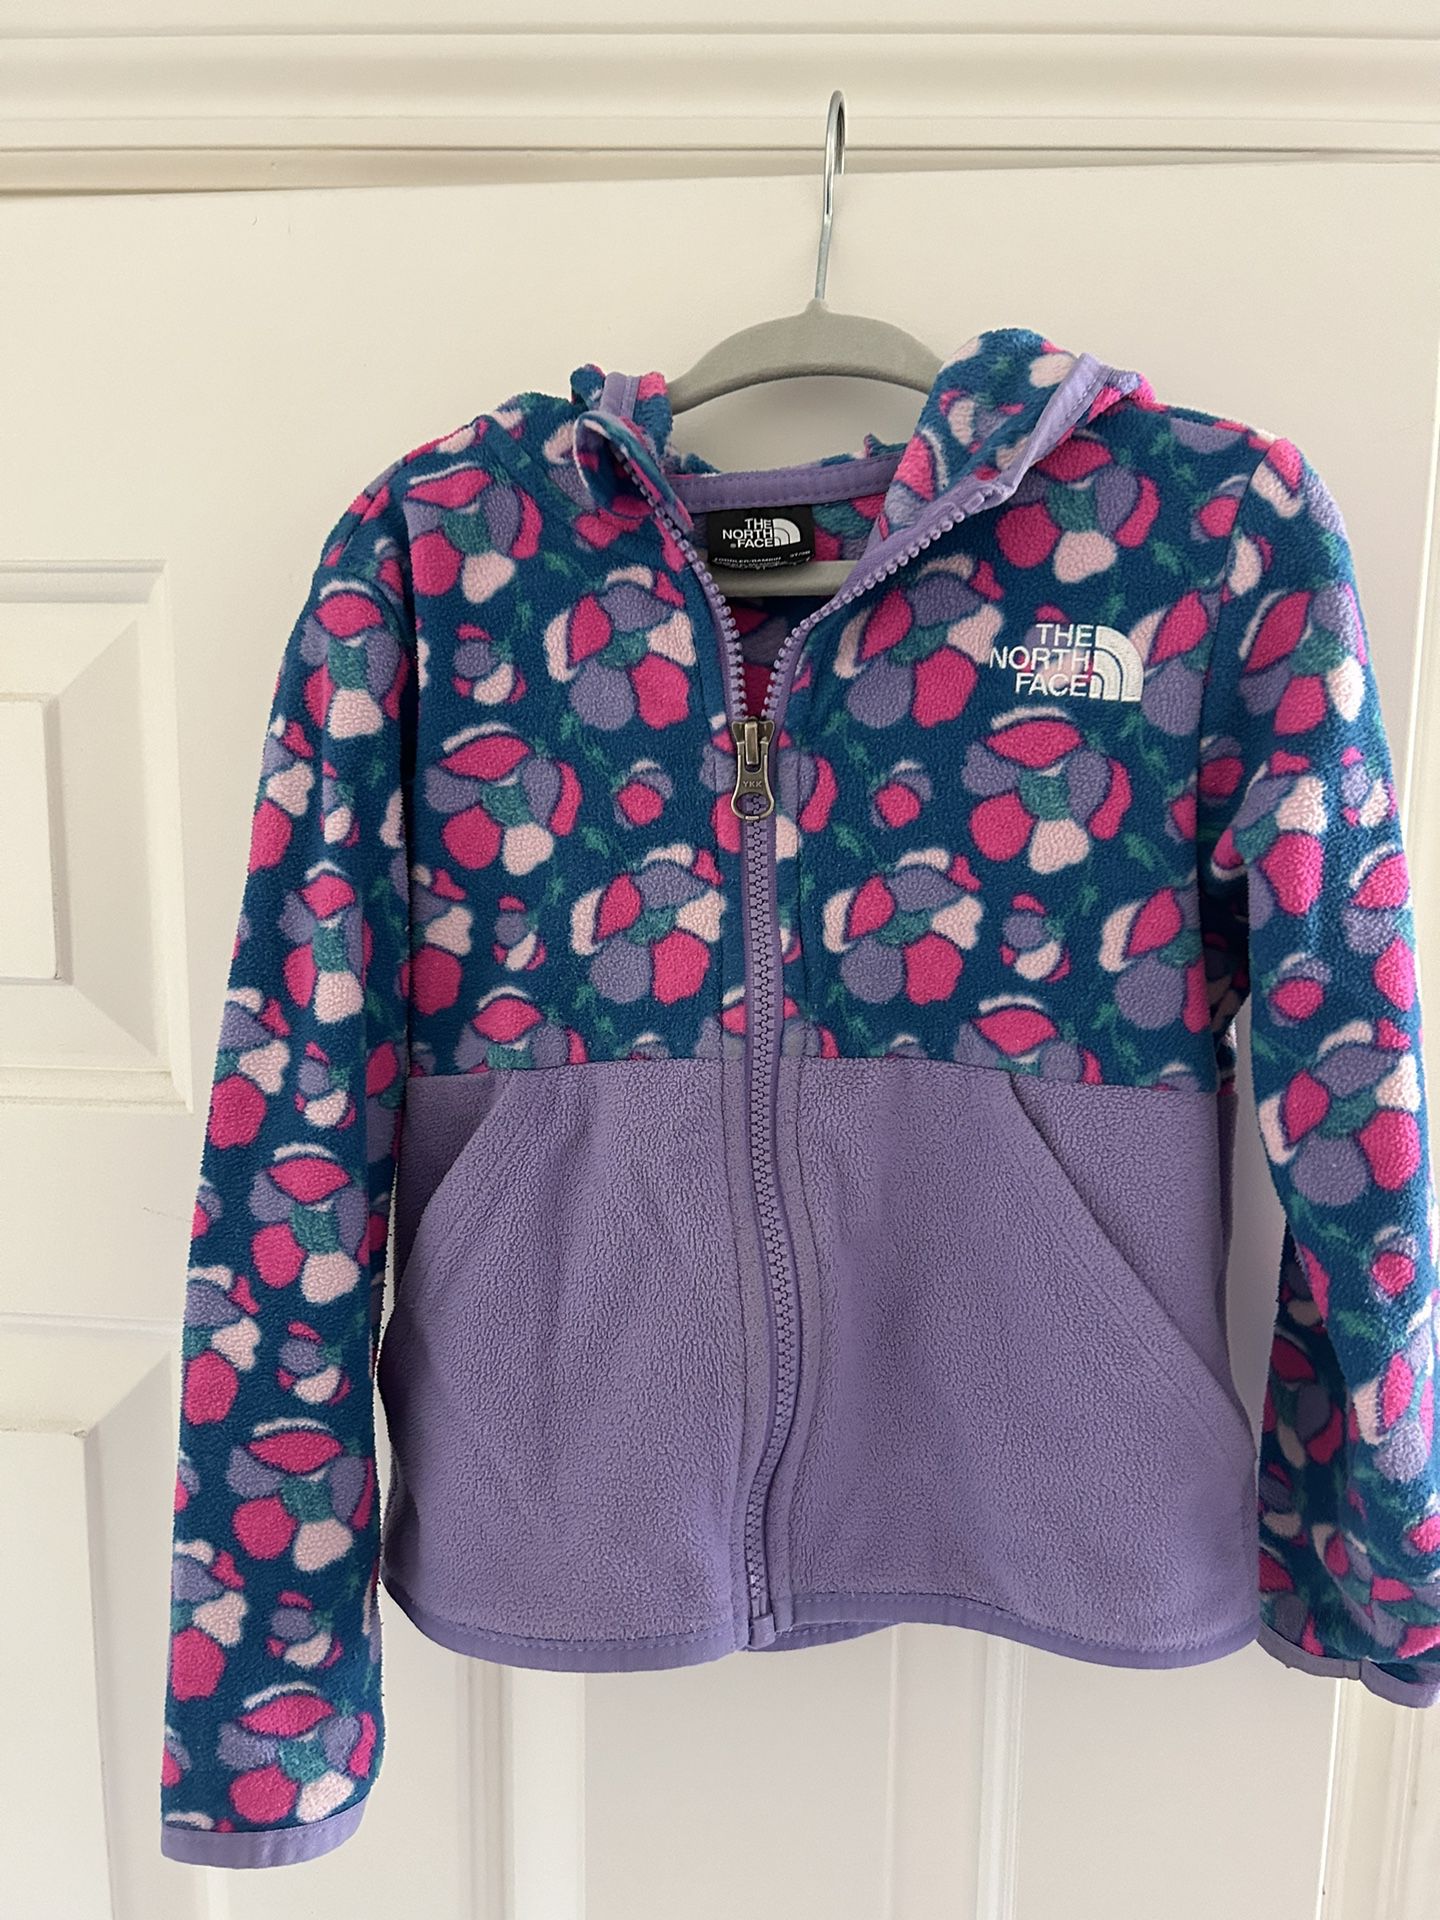 Girls 3T North Face Fleece Jacket With Hood